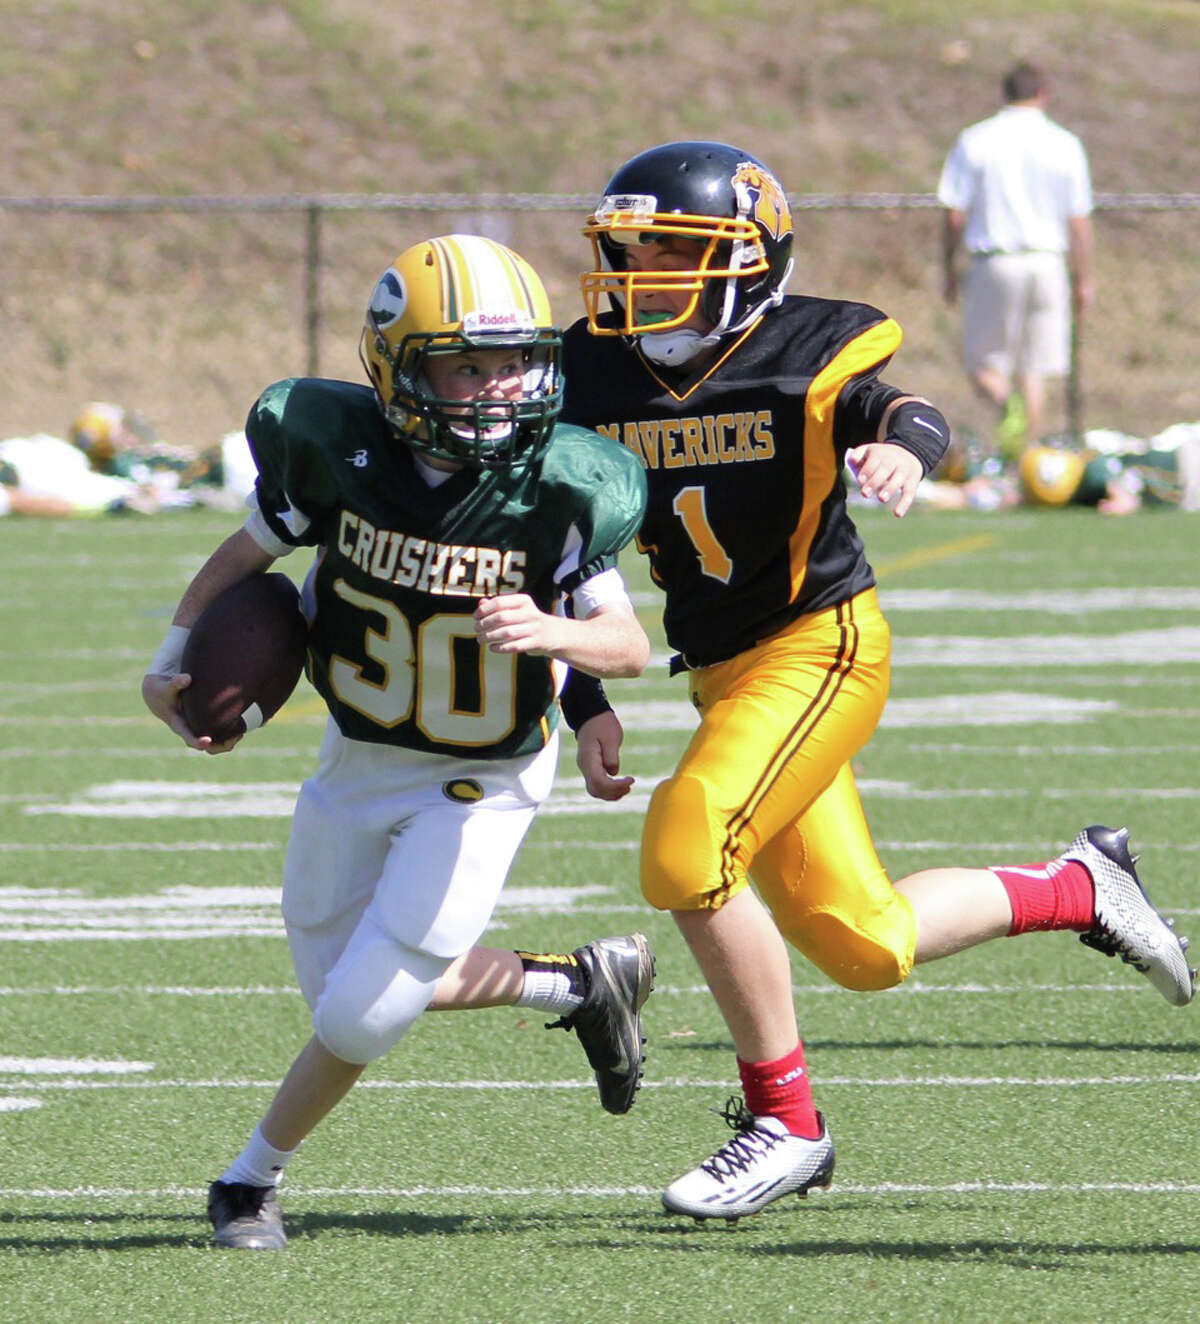 The Crushers' Will Grimes runs away from the Mavericks' defense.